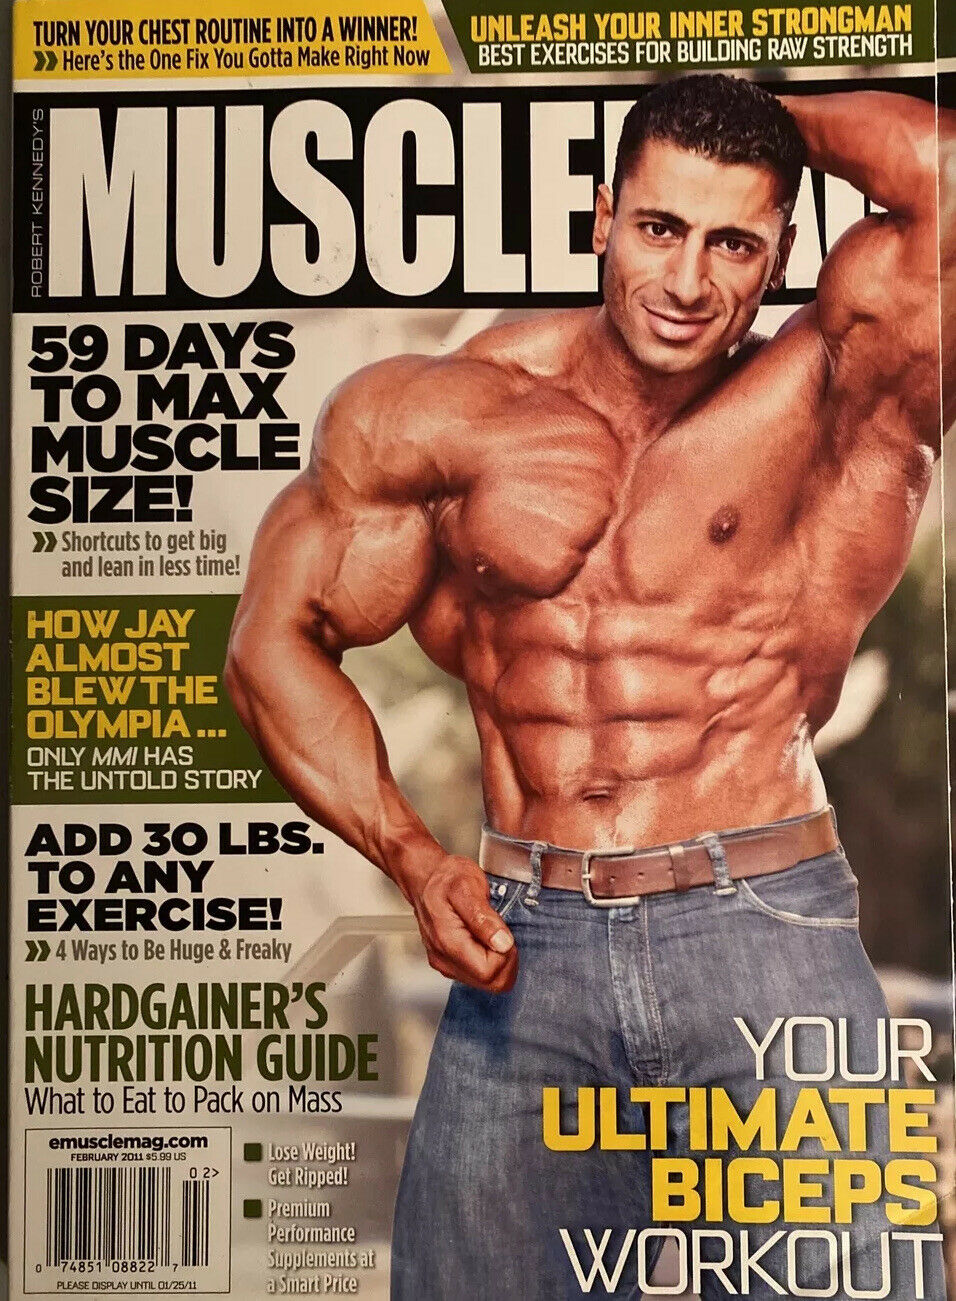 Muscle Mag February 2011 magazine back issue Muscle Mag magizine back copy Muscle Mag February 2011 Bodybuilding and Fitness Magazine Back Issue Published by Canadian Robert Kennedy and Founded in 1974. Turn Your Chest Routine Into A Winner! Here's The One Fix You Gotta Make Right Now.